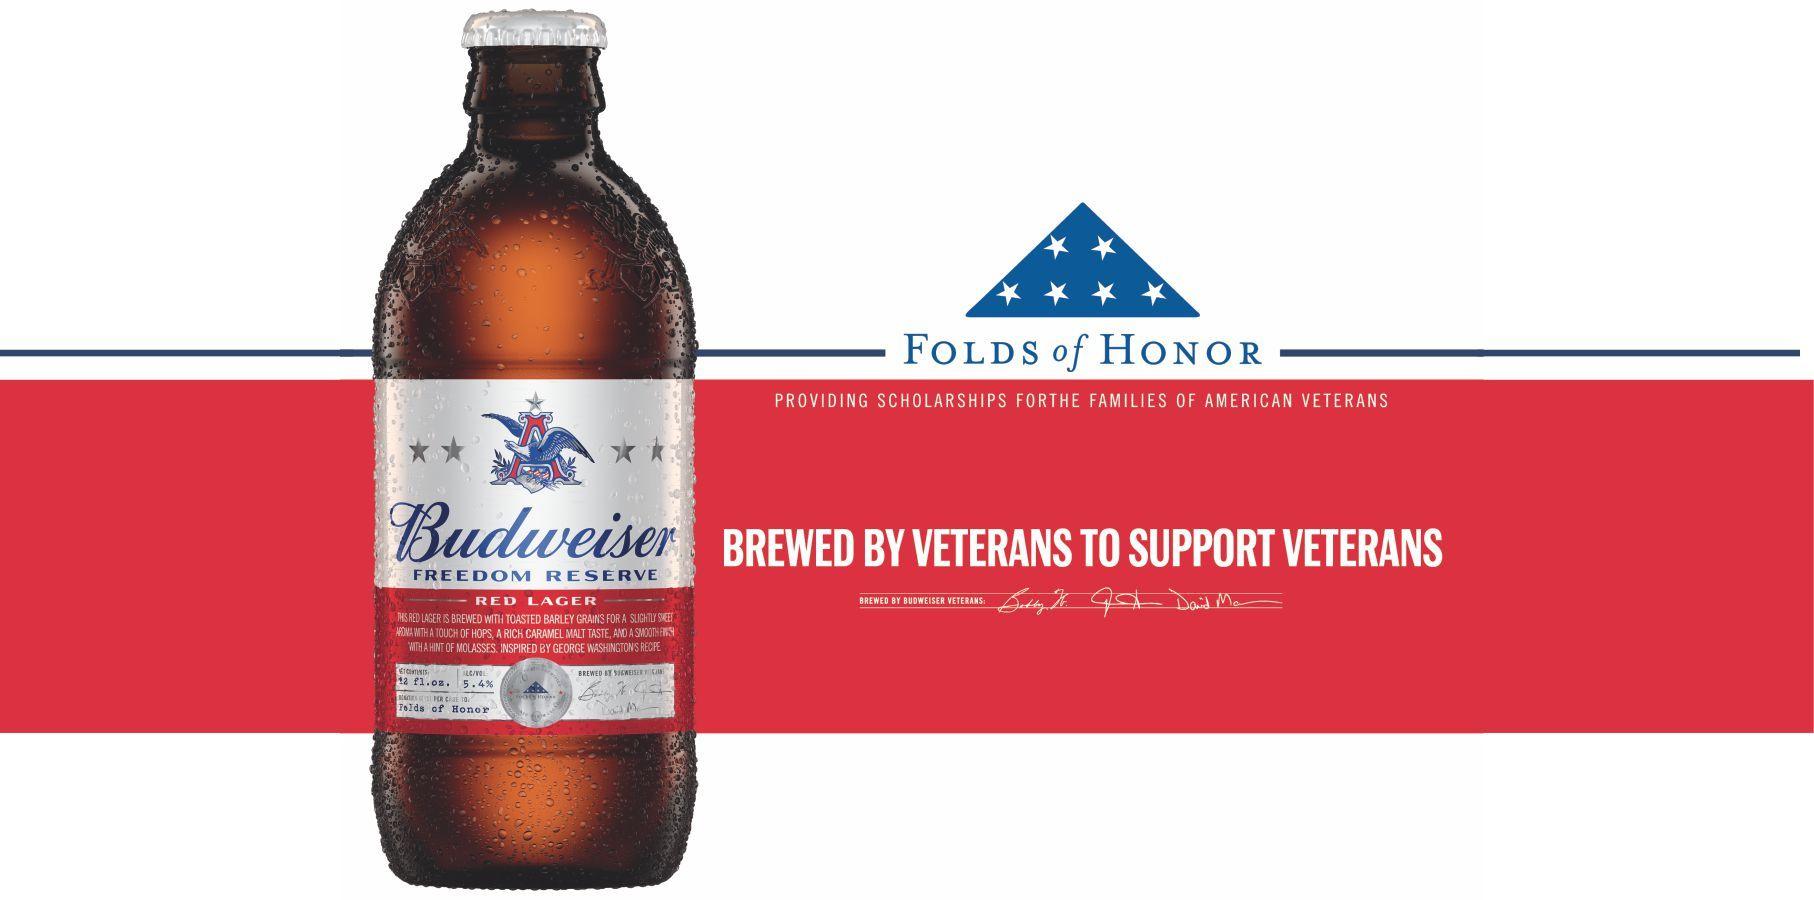 Beer Honor Logo - Donnewald Distributing Company | Honor Their Sacrifice, Educate ...